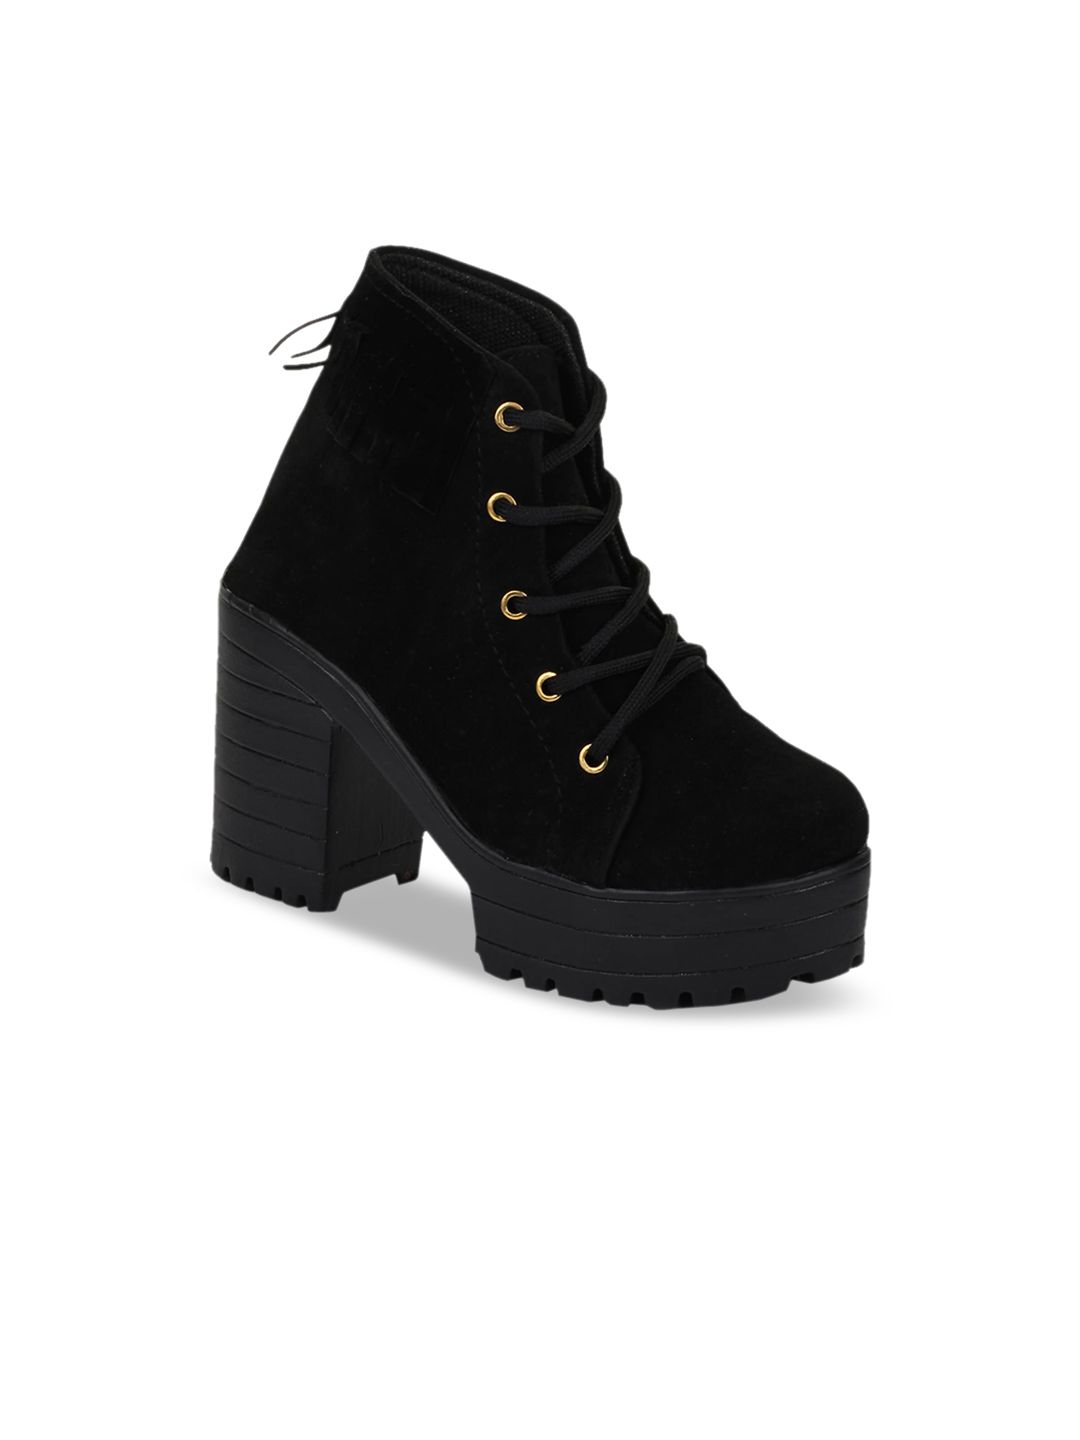 VAYONAA Woman Black Suede High-Top Block Heeled Boots Price in India